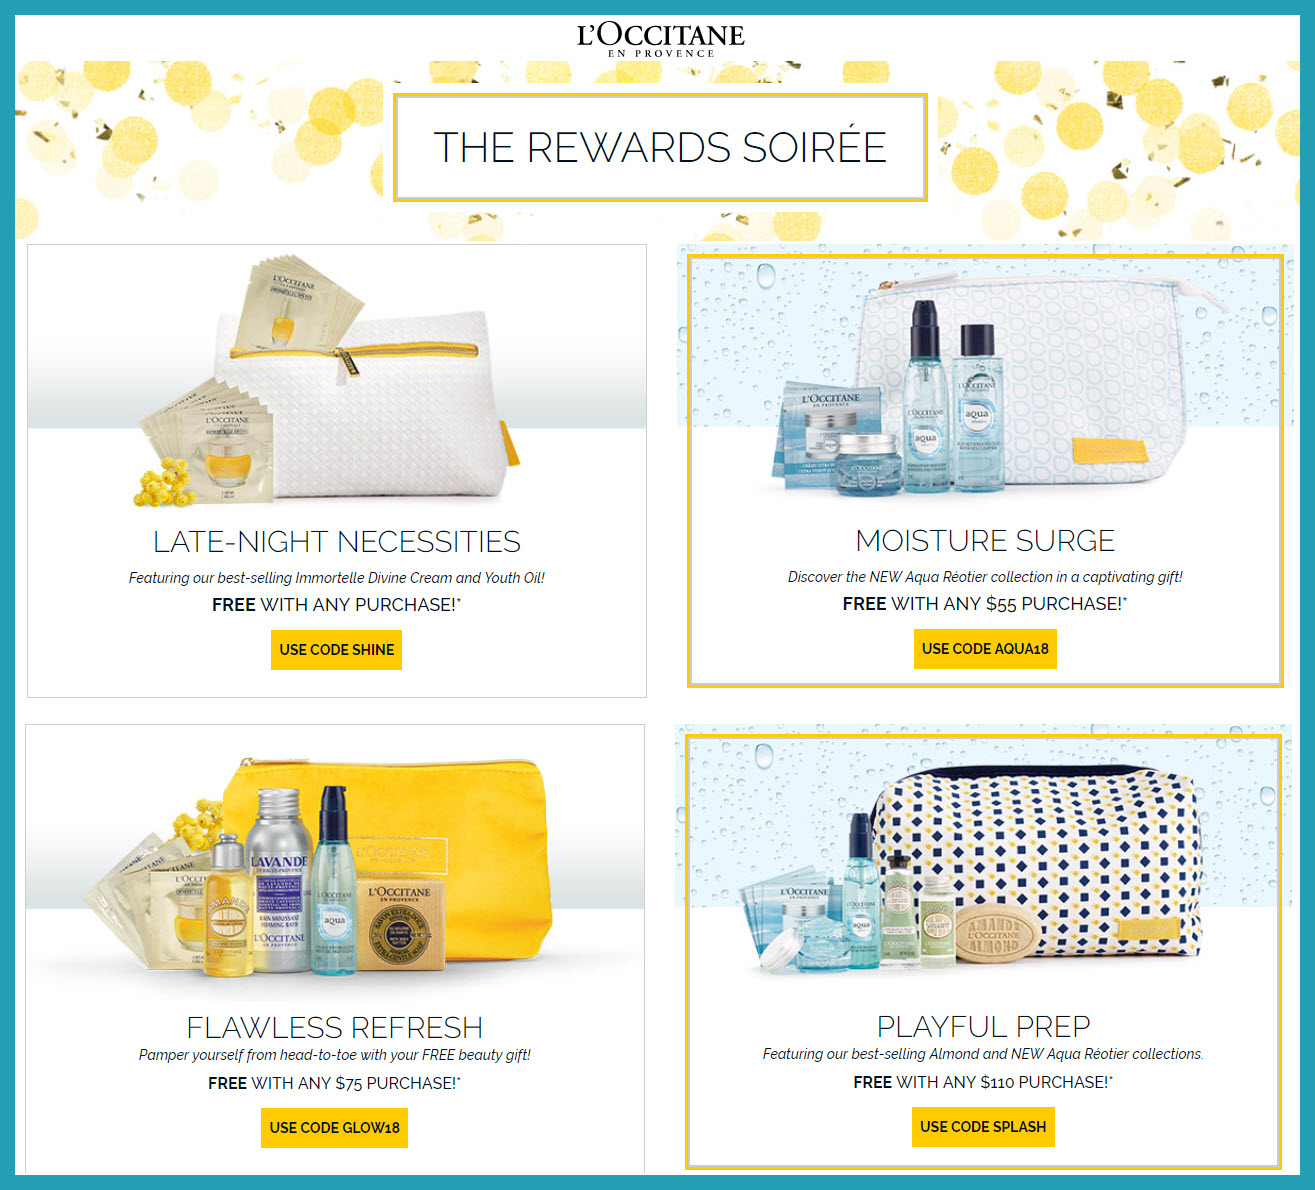 Receive a free 10-pc gift with $110 L'Occitane purchase